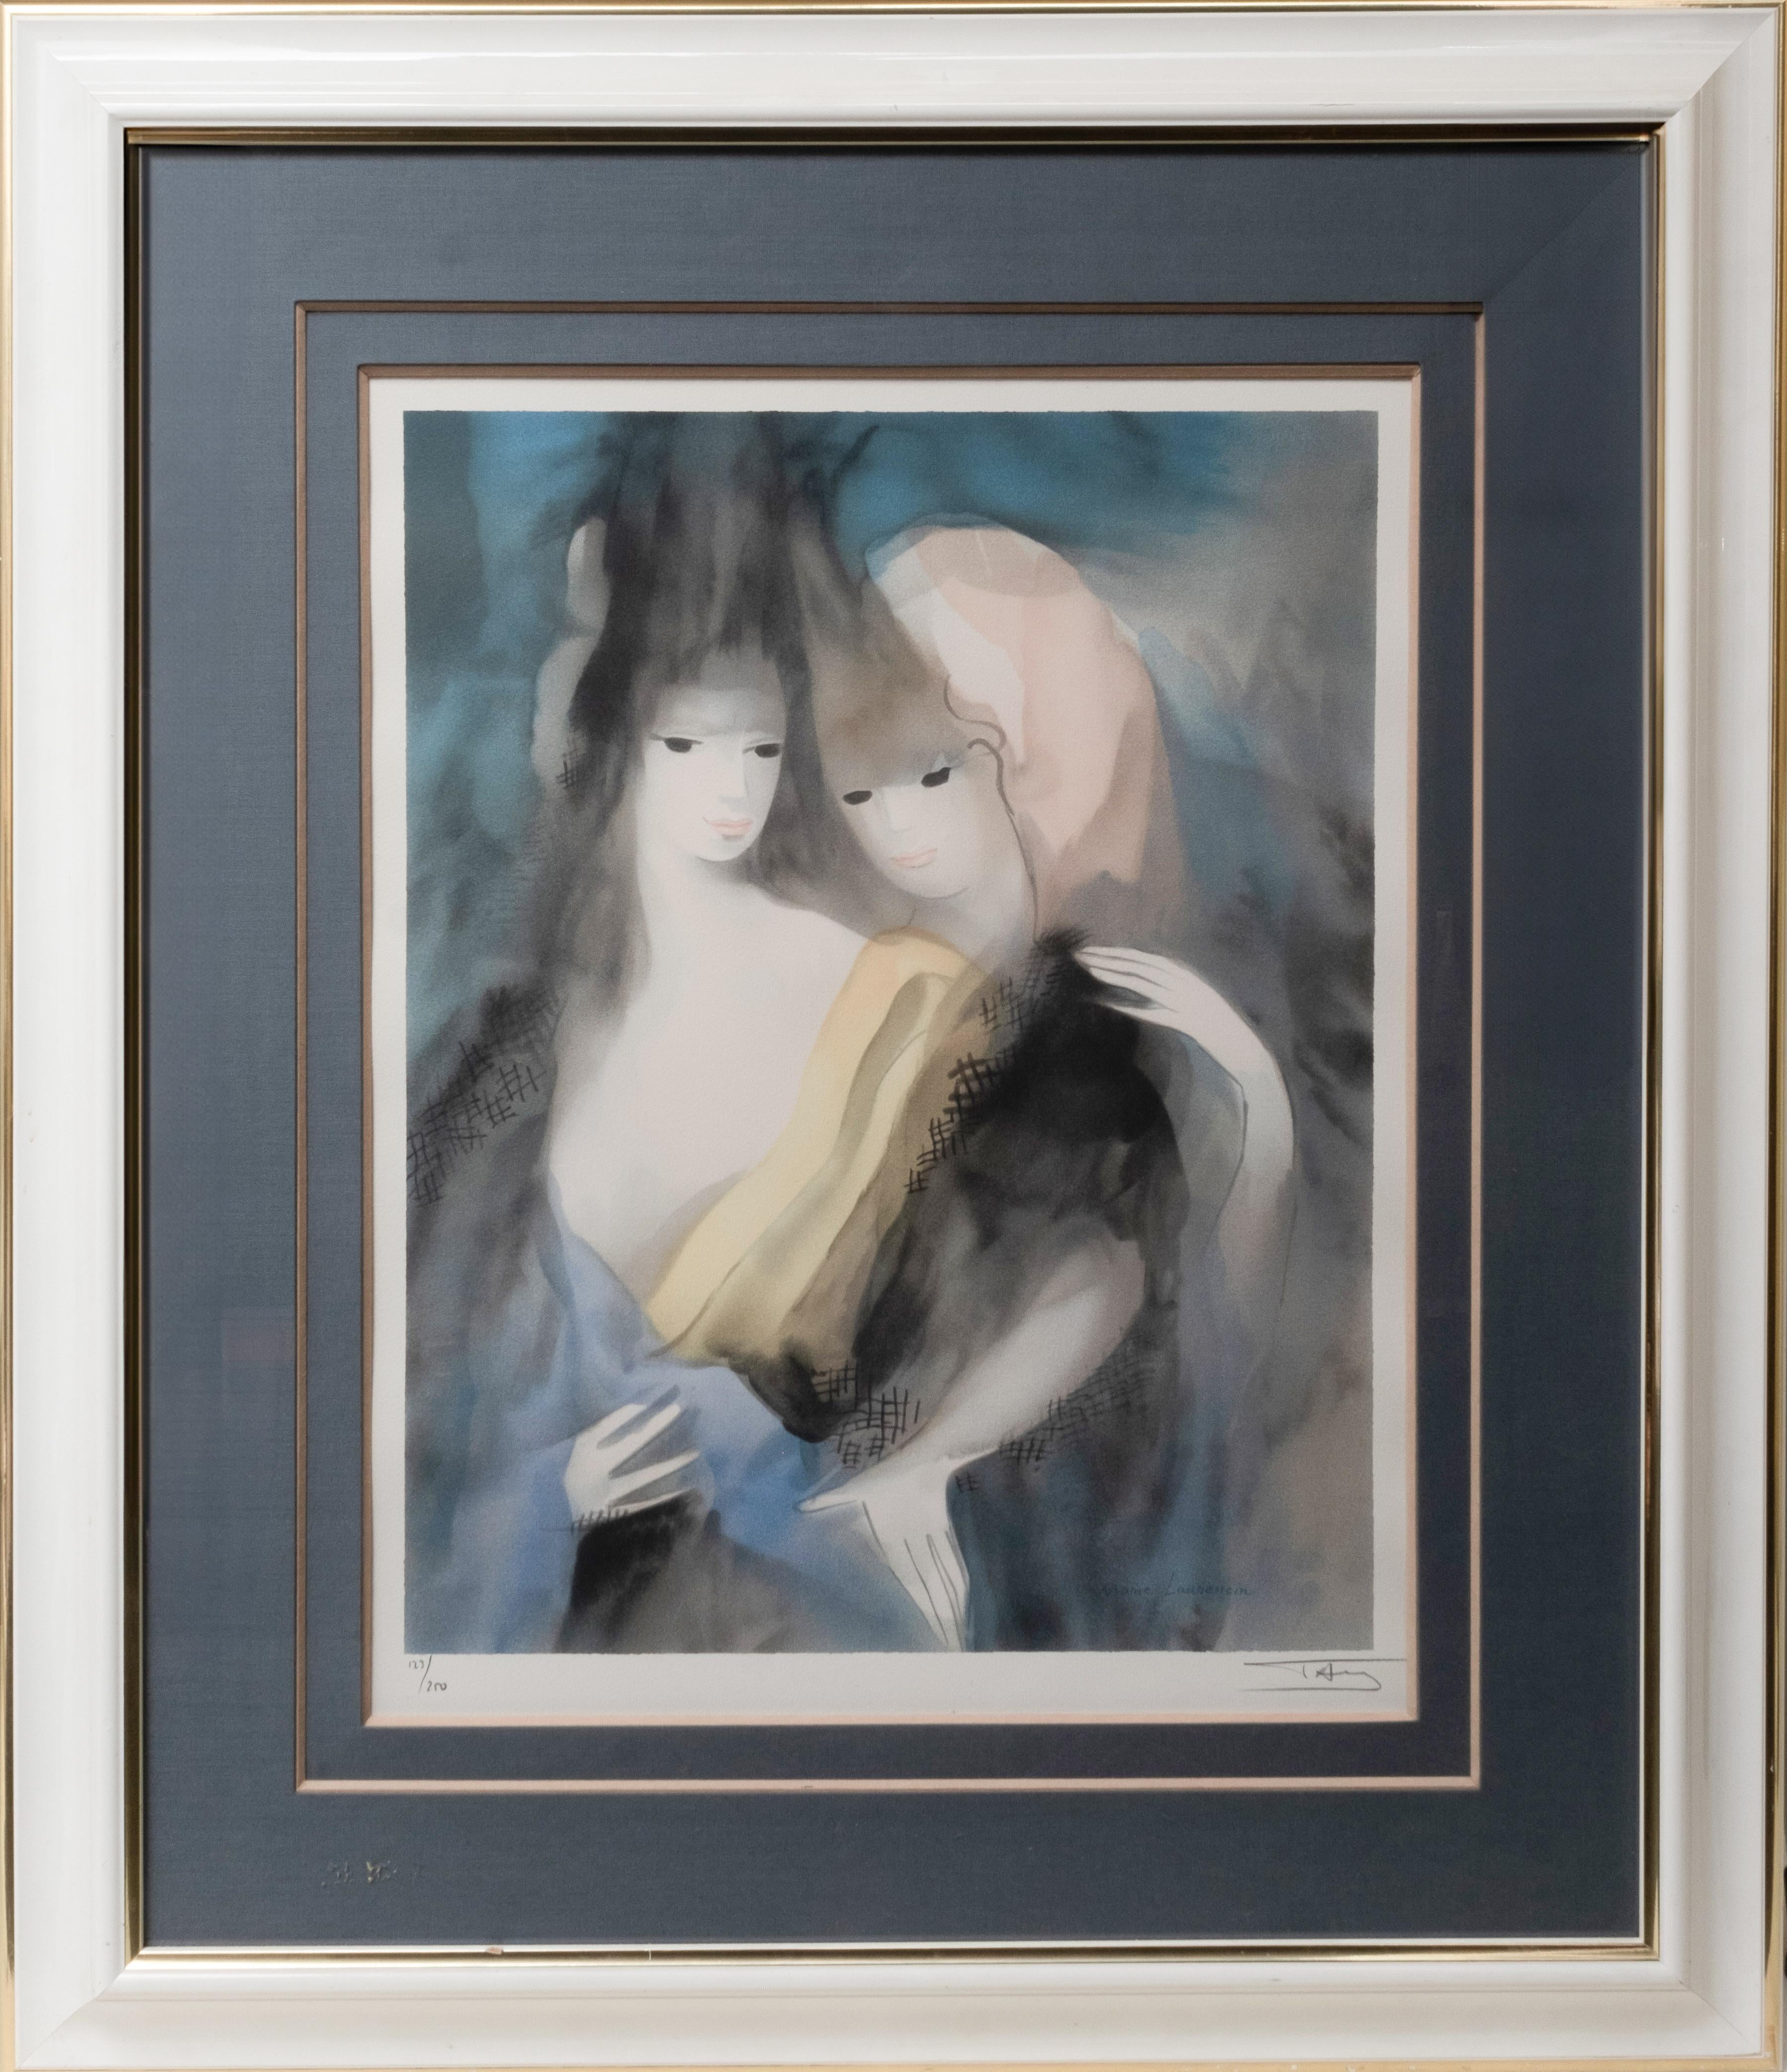 Made for the Orphelins d'Auteuil, sole legatees of the work of Marie Laurencin 123/250 on Arches Vellum Paper